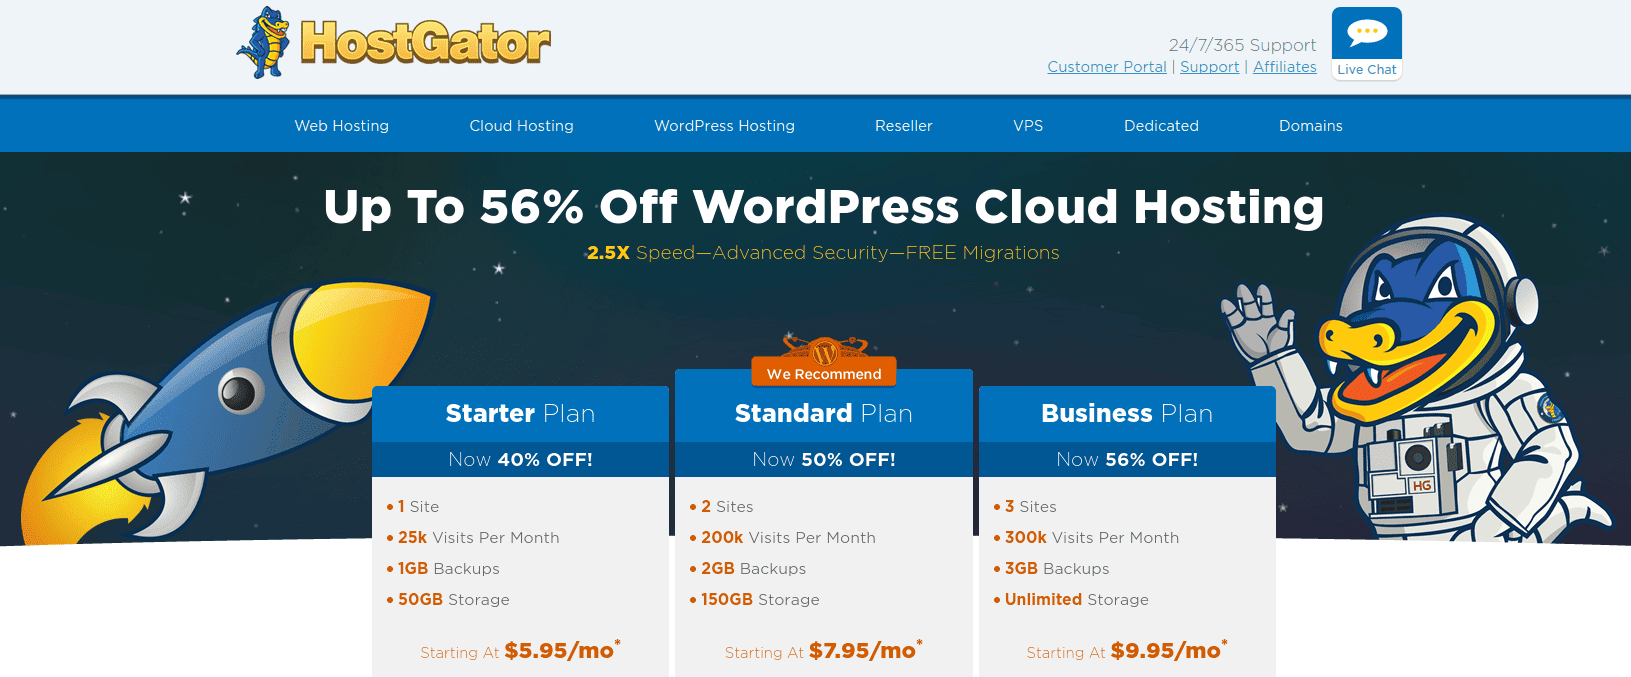 A screenshot of HostGator's pricing for WordPress websites A screenshot of HostGator's pricing for WordPress website hosting